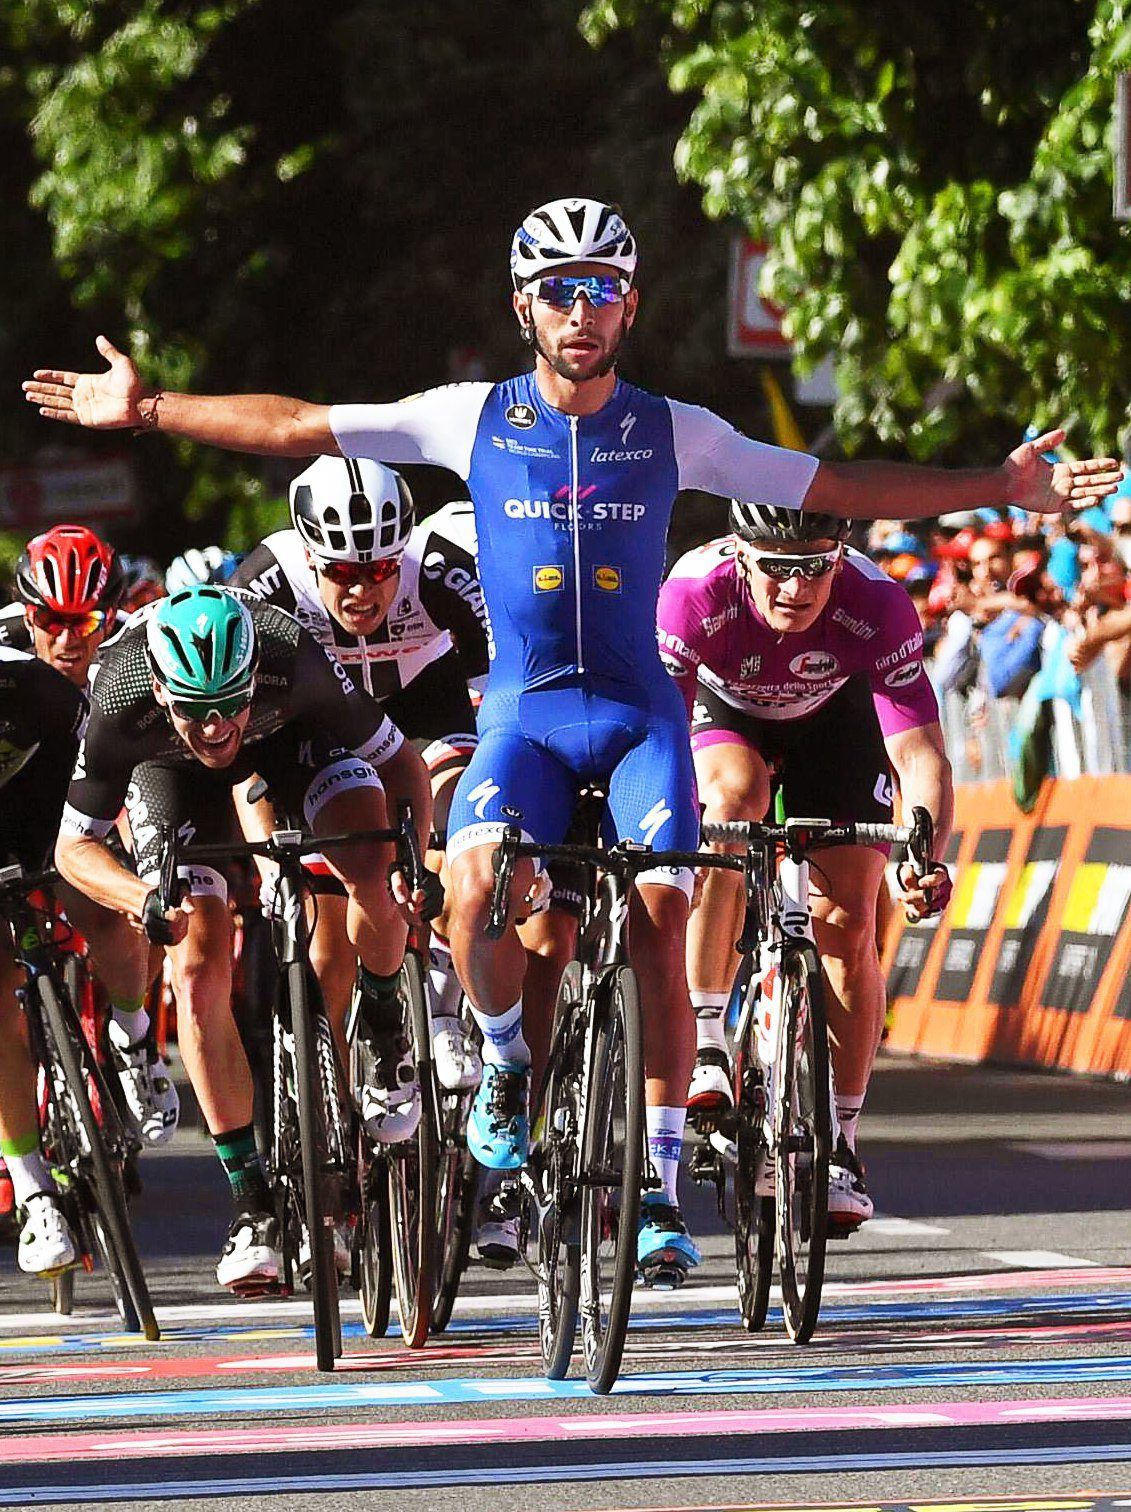 epa05955099 Colombian rider Fernando Gaviria (C) of the Quick-Step Floors team celebrates while crossing the finish line to win the 5th stage of the 100th Giro d'Italia cycling race over 159km from Pedara to Messina, Italy, 10 May 2017.  EPA/ALESSANDRO DI MEO ITALY CYCLING GIRO D'ITALIA